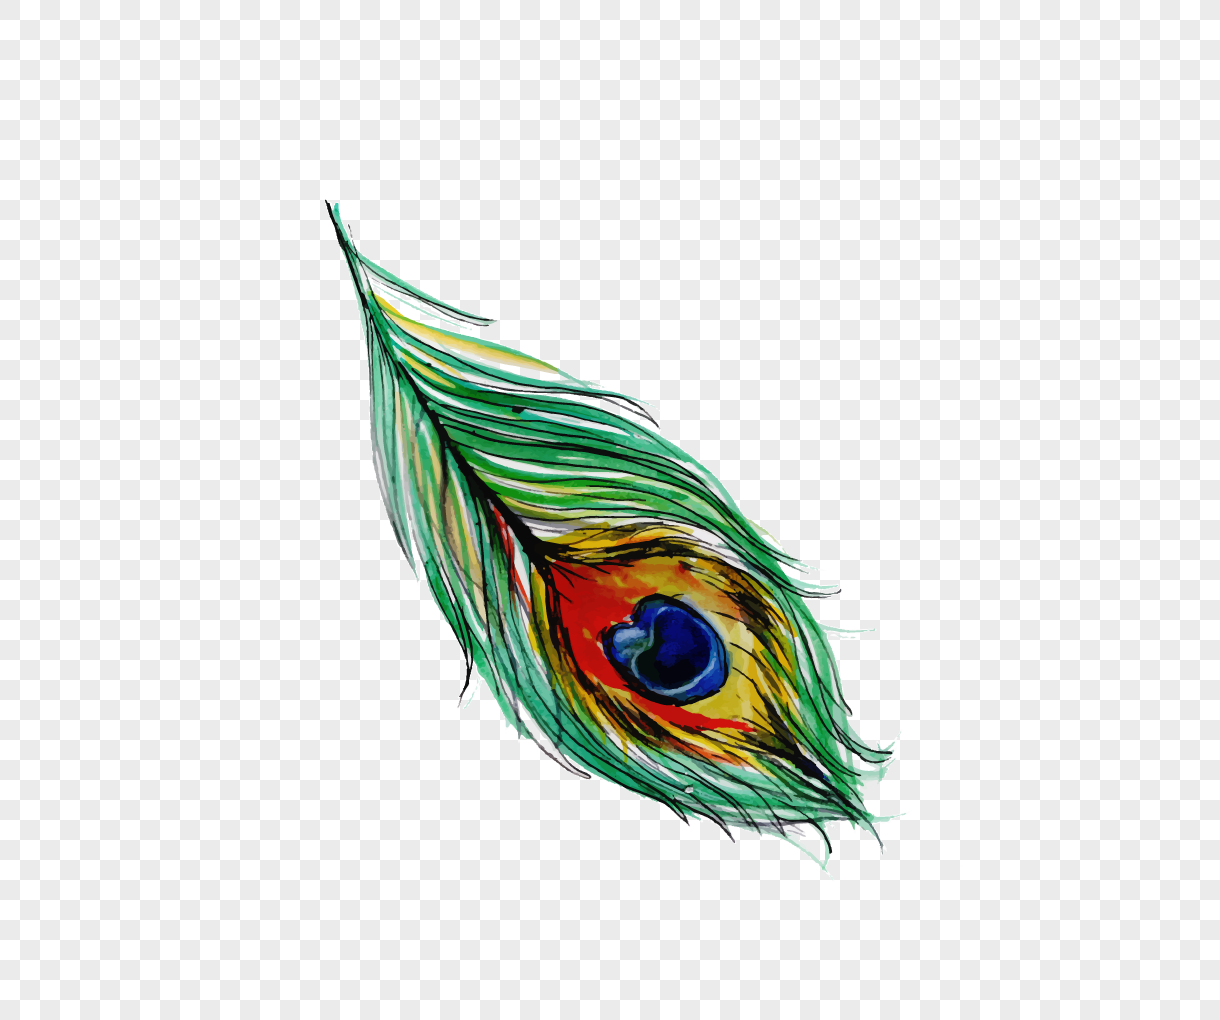 Download Vector peacock feather decorative material png image ...